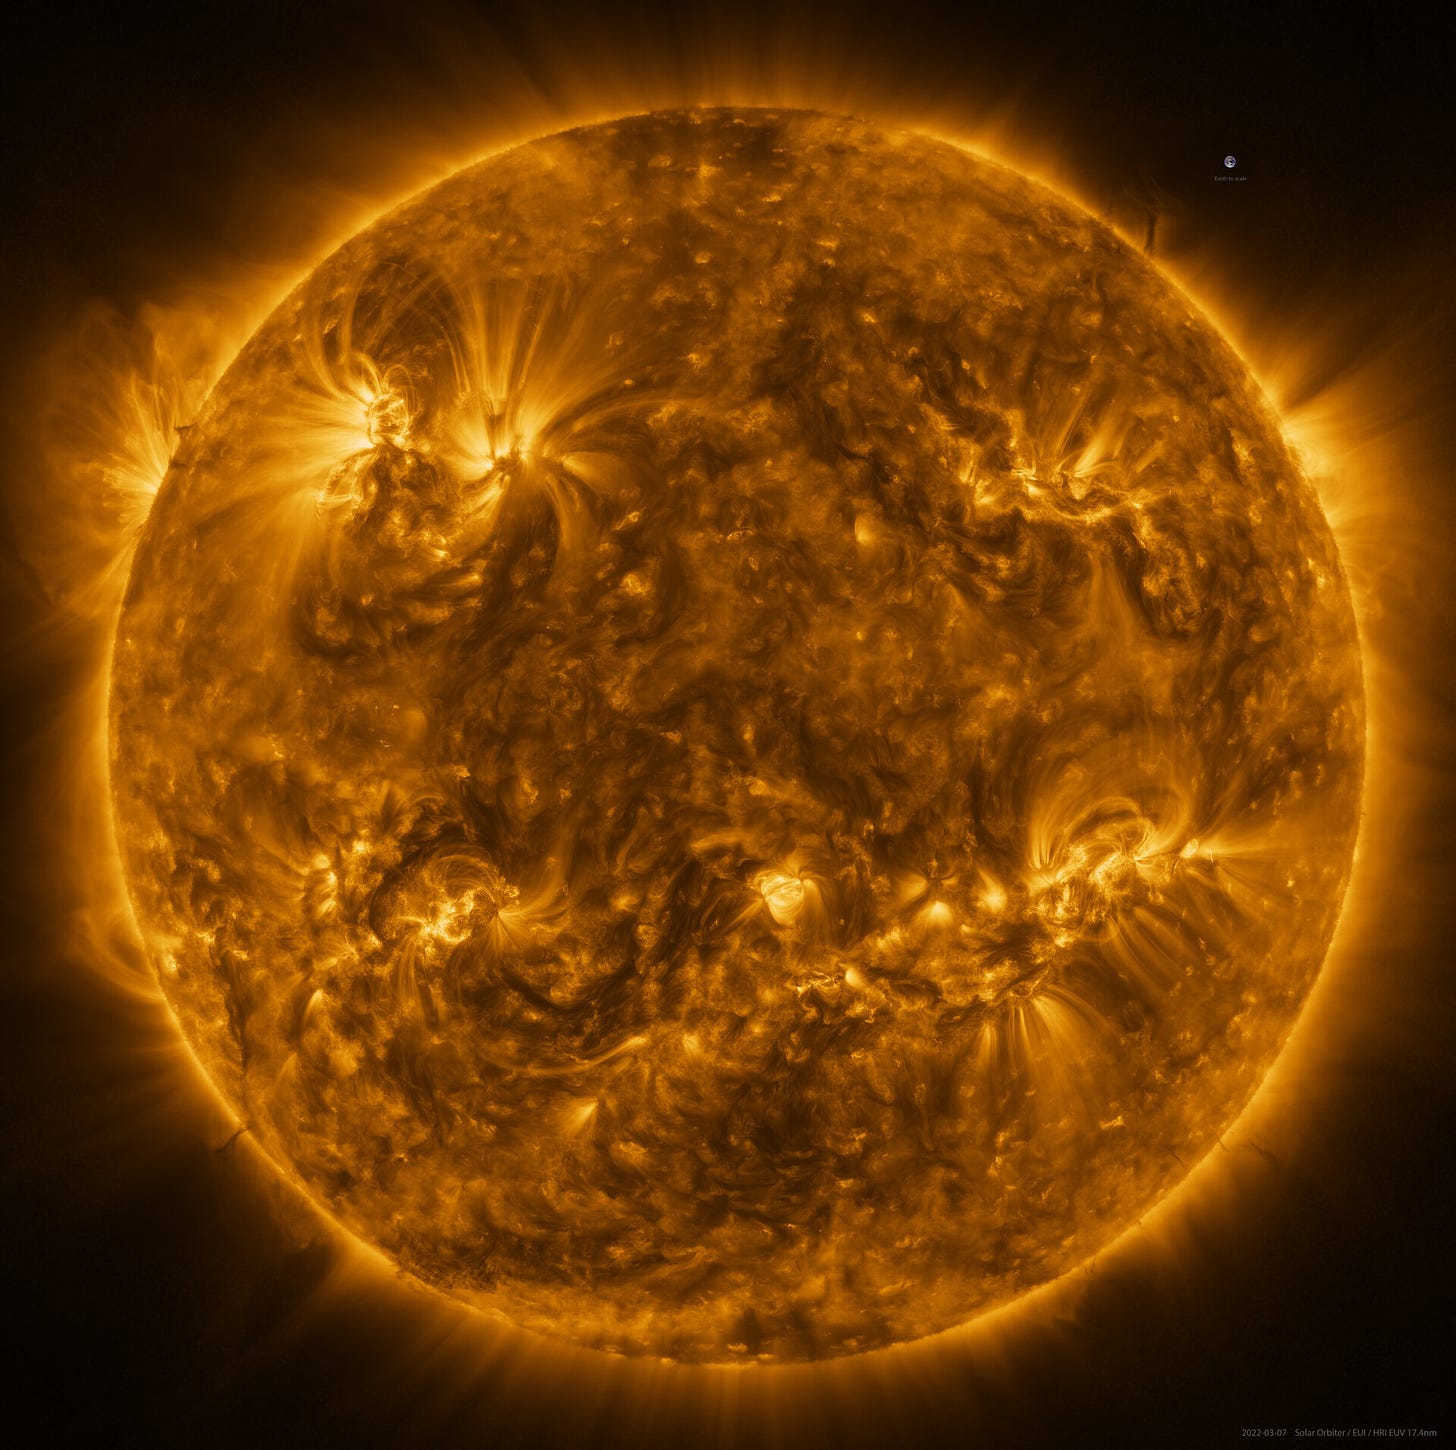 A very high res photo of the sun that kind of looks like a melted and stitched back together smiley face.